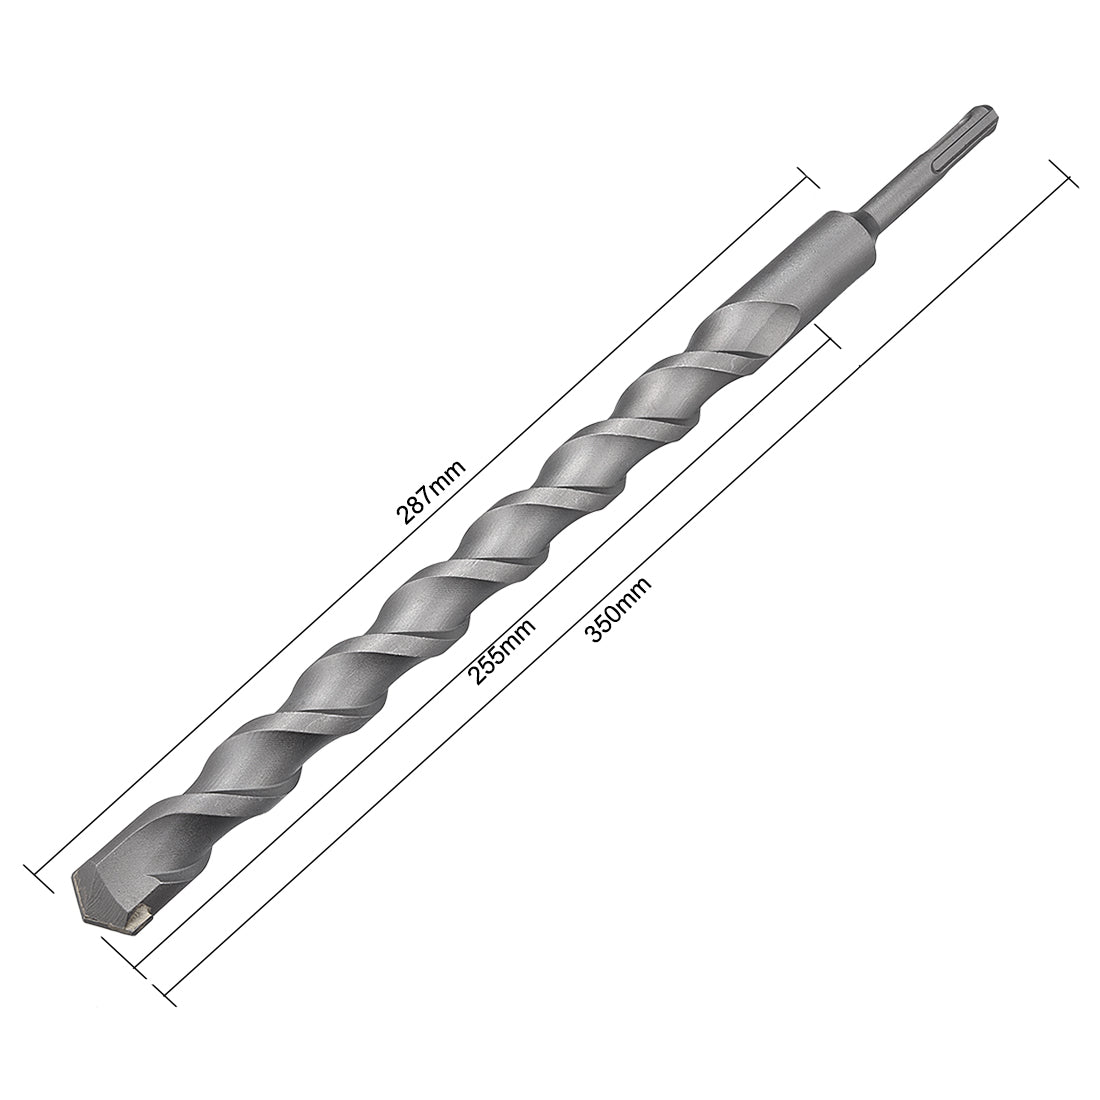 uxcell Uxcell Masonry Drill Bit 25mmx350mm 10mm Round Shank for Impact Drill